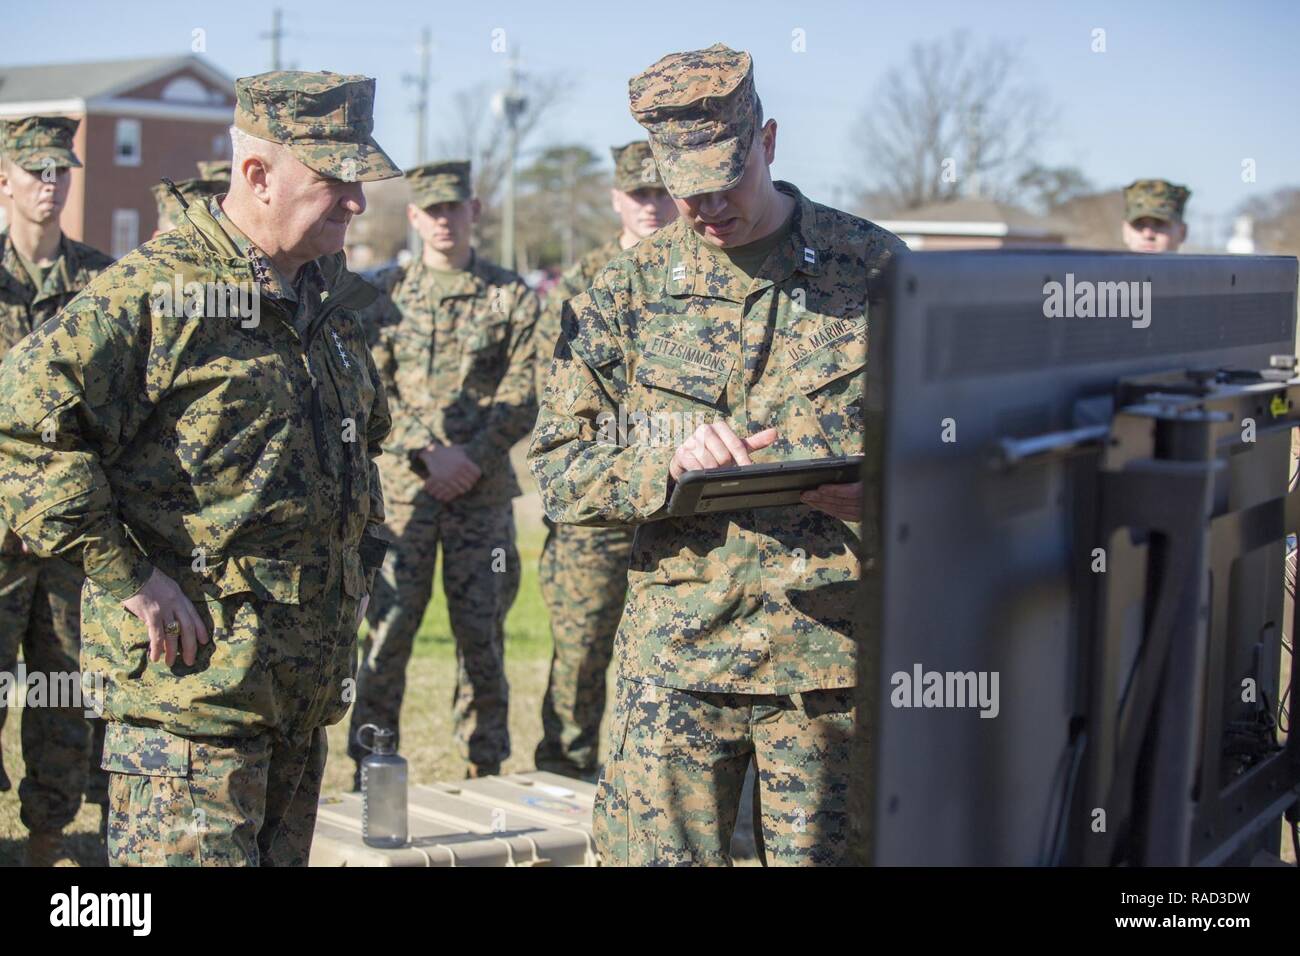 Mr. Lance Jeffrey, right, Training Support Center Lead, Training and Education Command, briefs Gen. Glenn Walters the Assistant Commandant of the Marine Corps and senior leaders on the usage of simulator training systems during a visit to Camp Lejeune, N.C., Jan. 27, 2017. The purpose of the visit was to increase awareness and capabilities of ground simulation and simulator training systems in support of operational forces combat readiness. Stock Photo